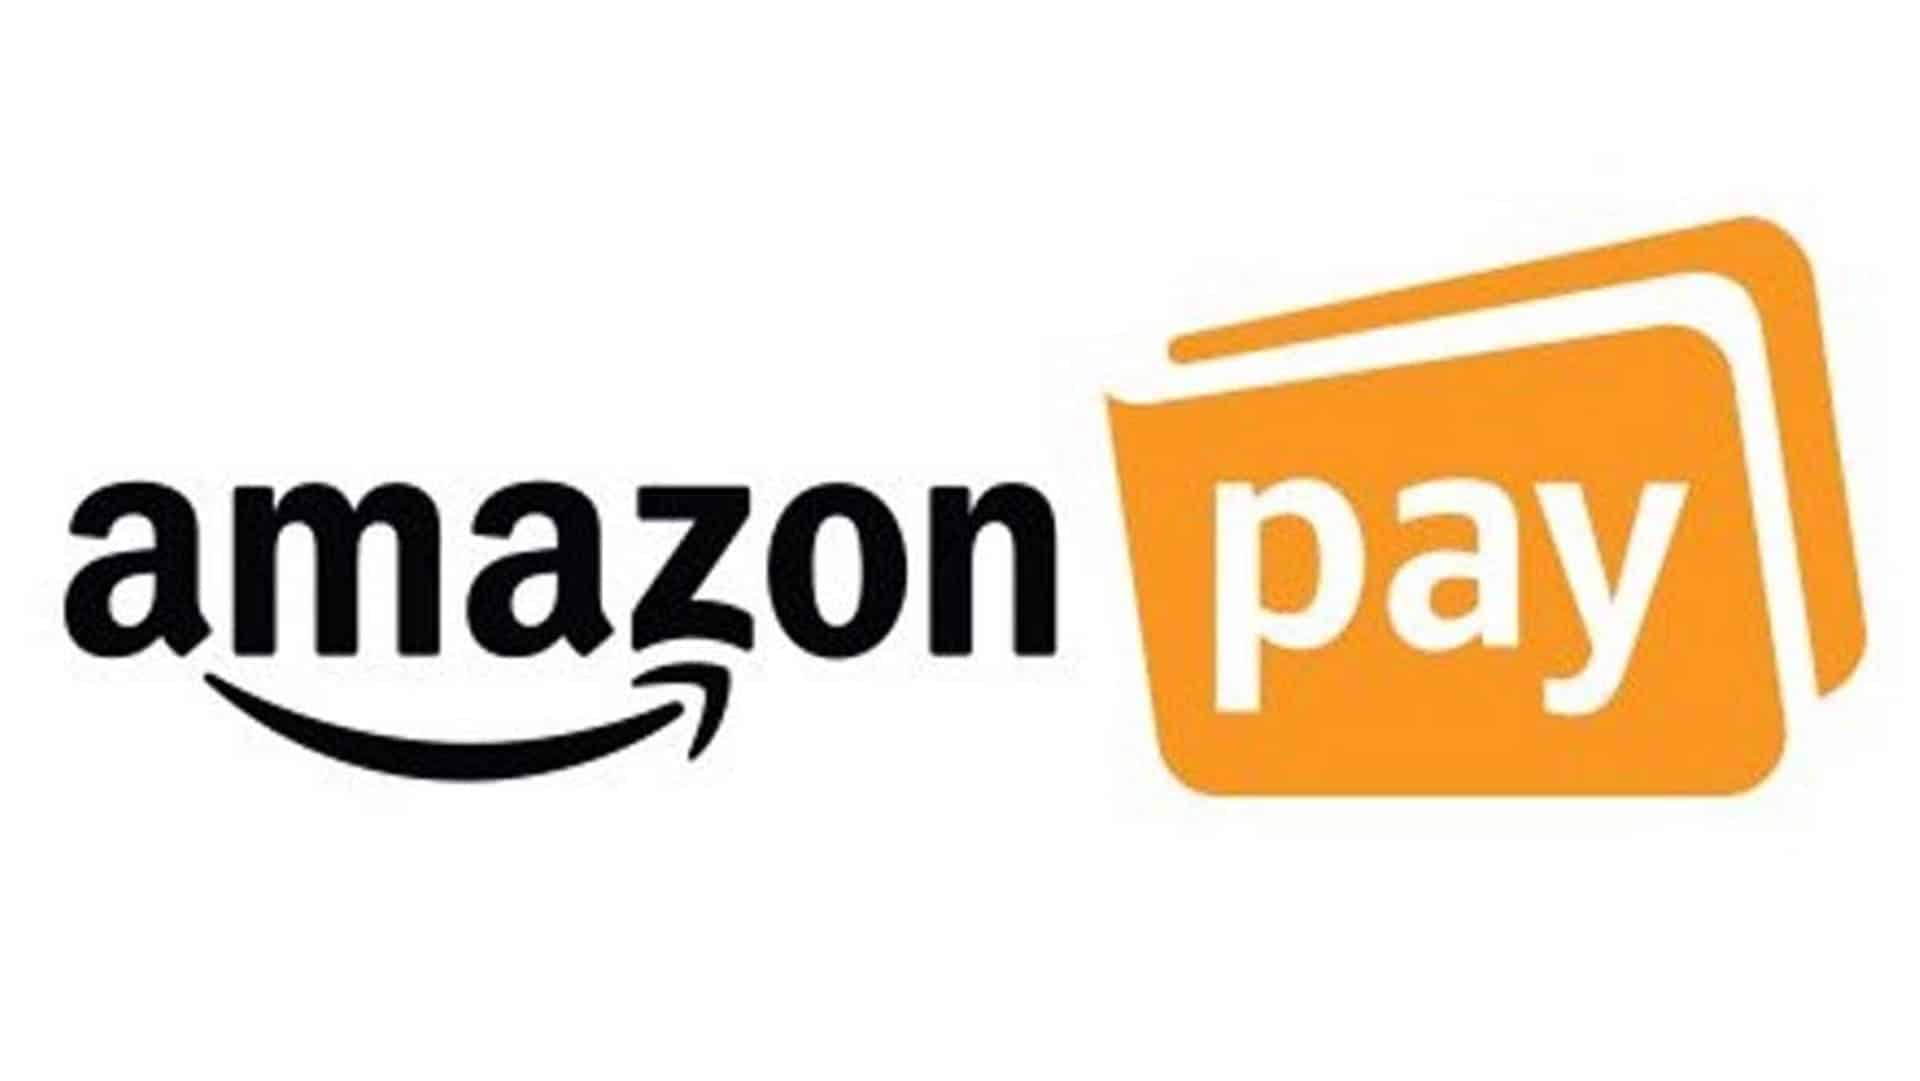 Amazon Pay partners with Kuvera for wealth management services